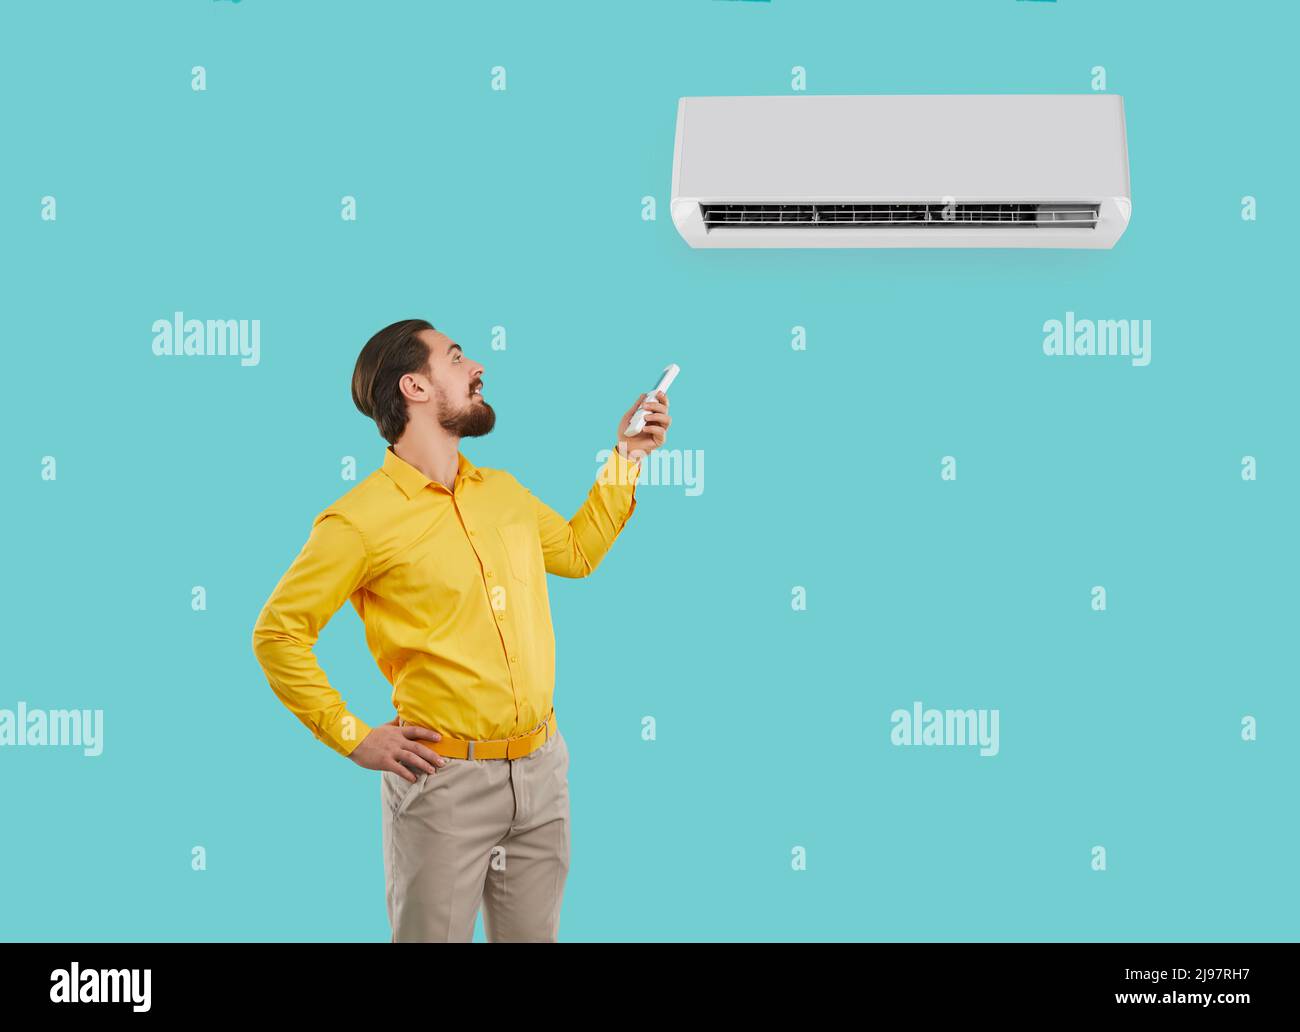 Happy man holding remote control controls or adjusts newly installed wall-mounted air conditioner. Stock Photo